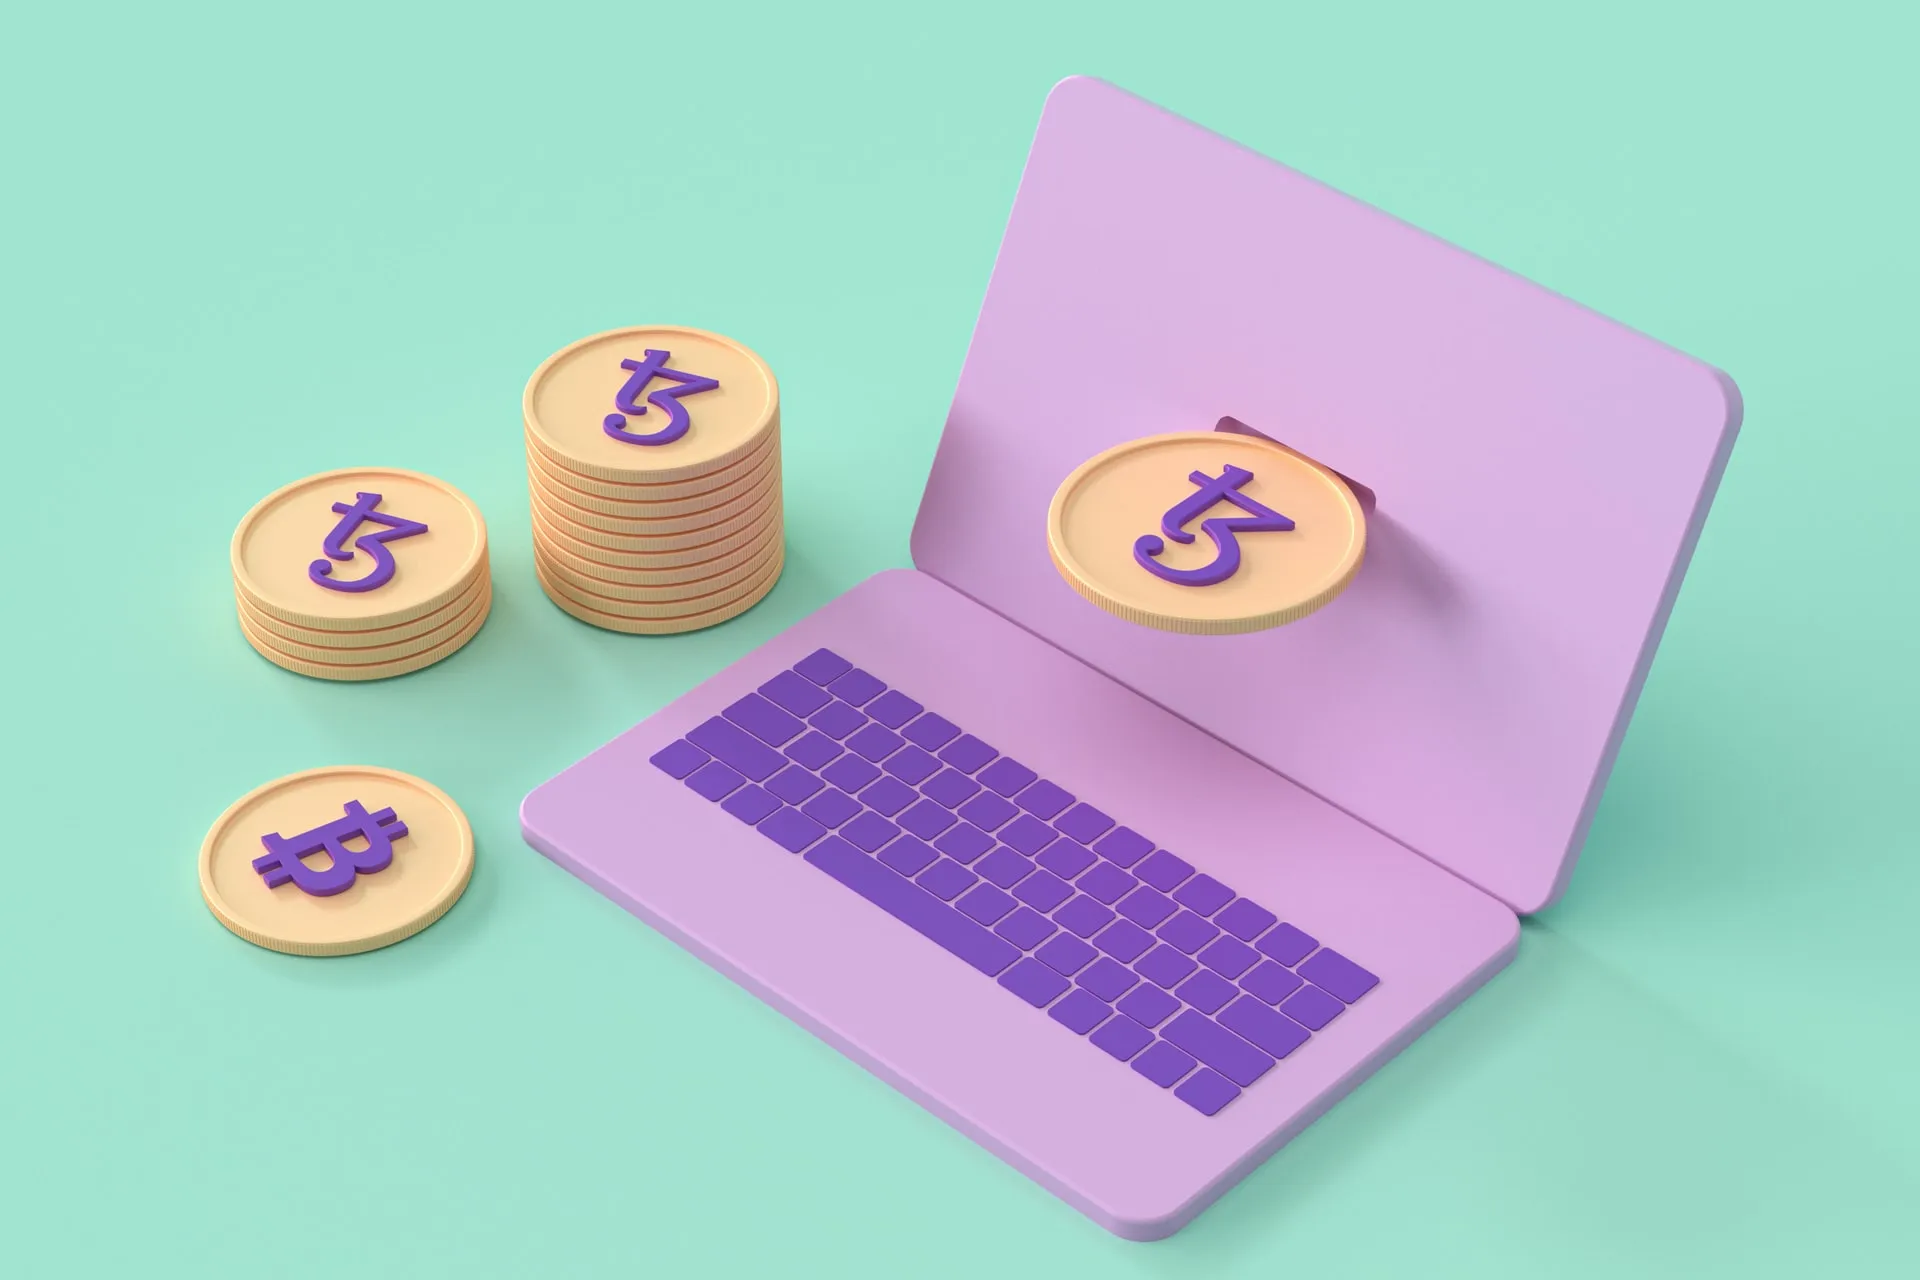 cryptocurrency and laptop concept art